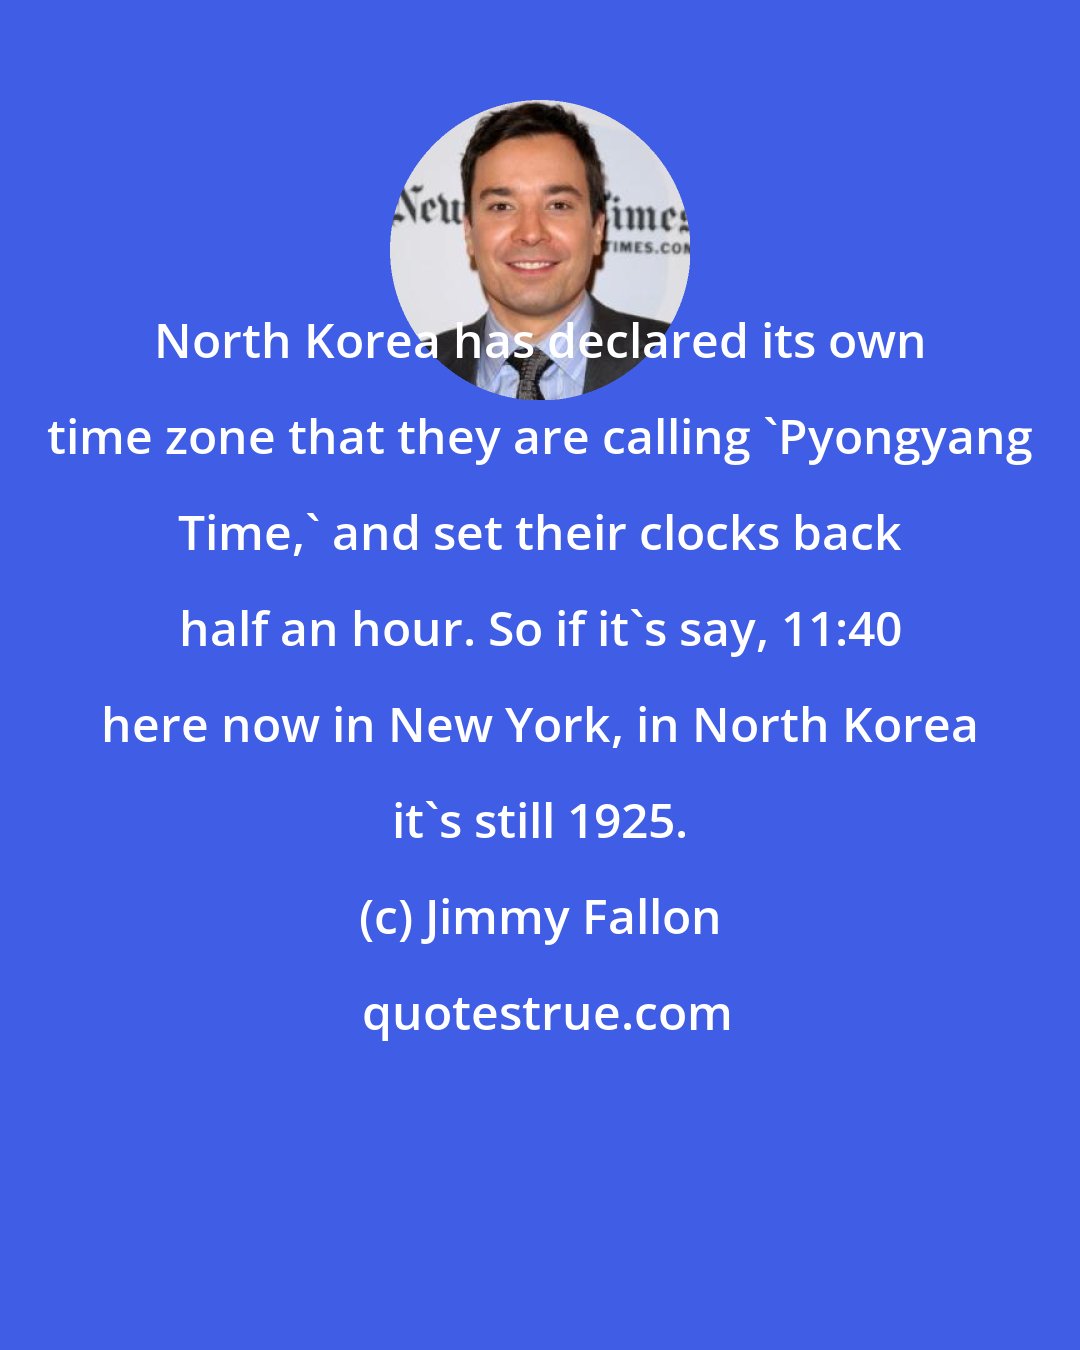 Jimmy Fallon: North Korea has declared its own time zone that they are calling 'Pyongyang Time,' and set their clocks back half an hour. So if it's say, 11:40 here now in New York, in North Korea it's still 1925.